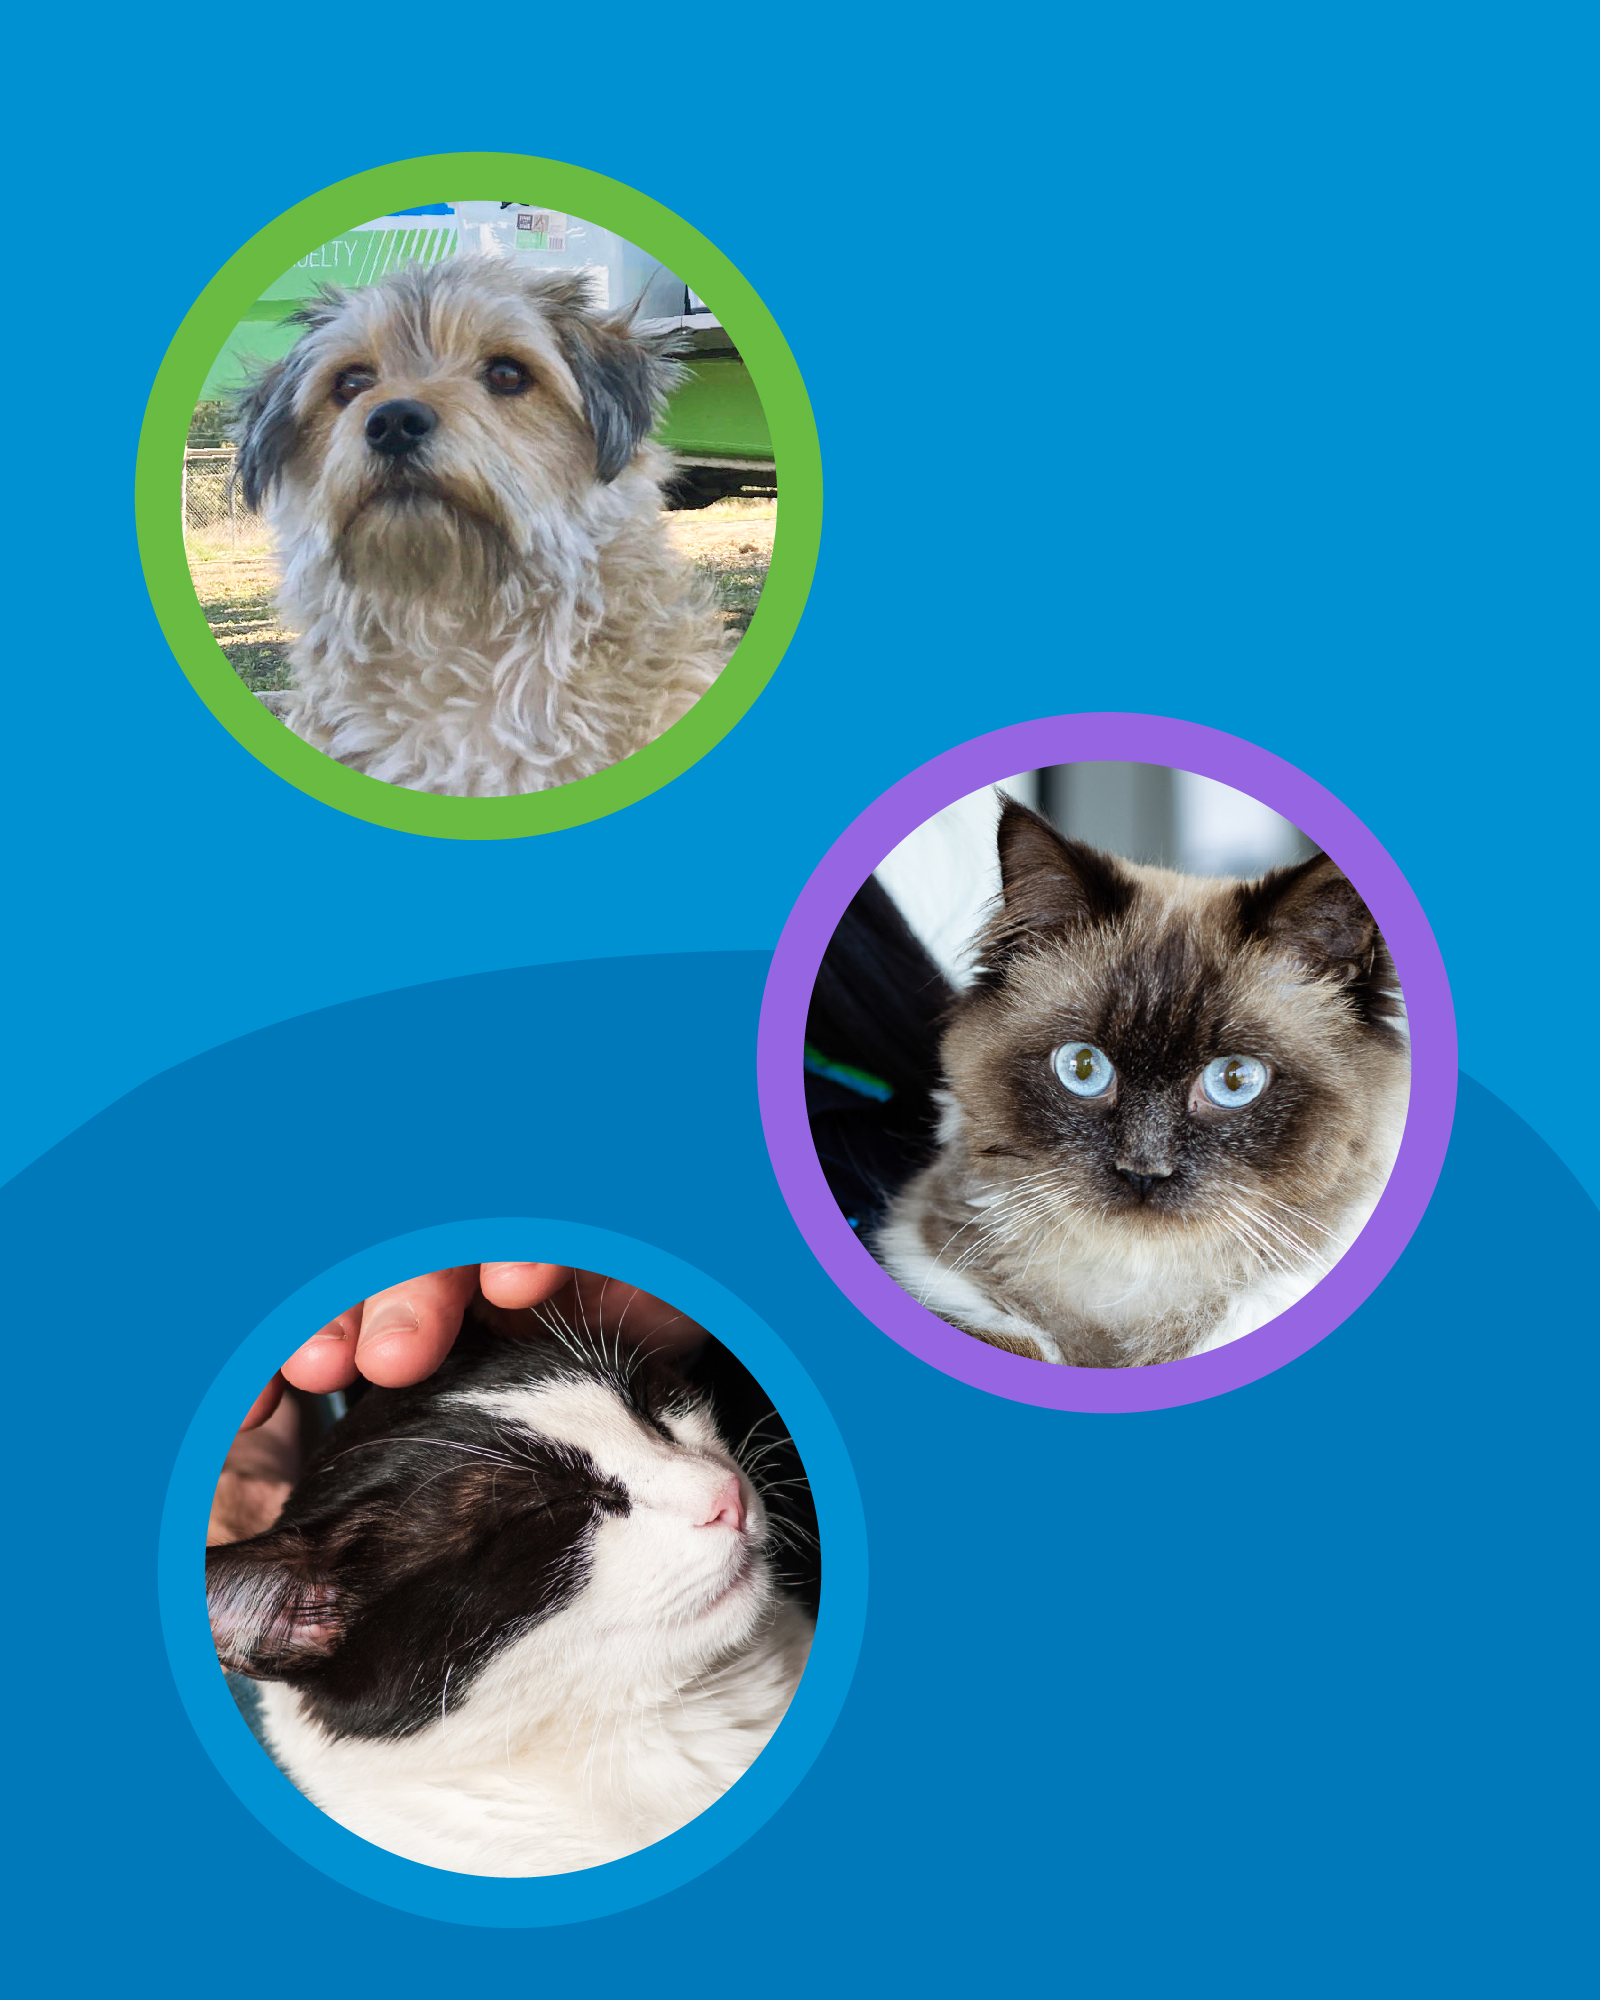 RSPCA NSW The Passion Project Design Concepts v4.3